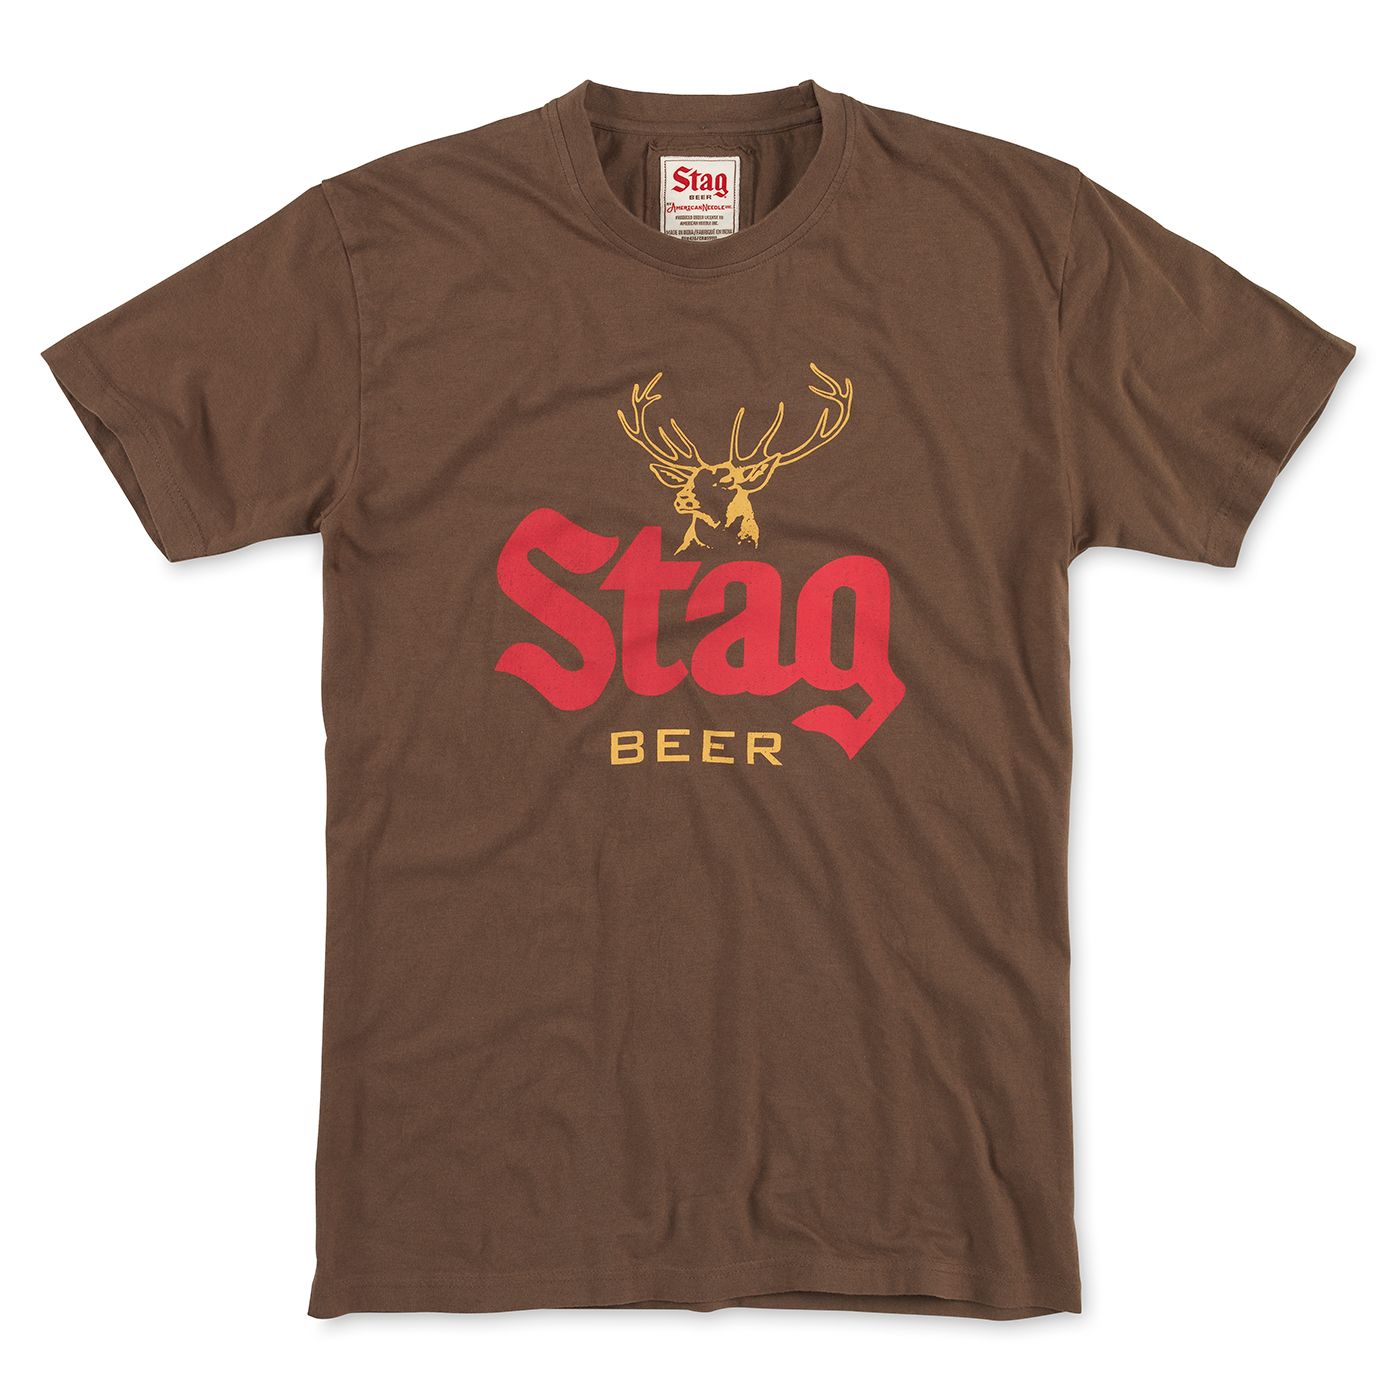 Brass Tacks STAG BEER